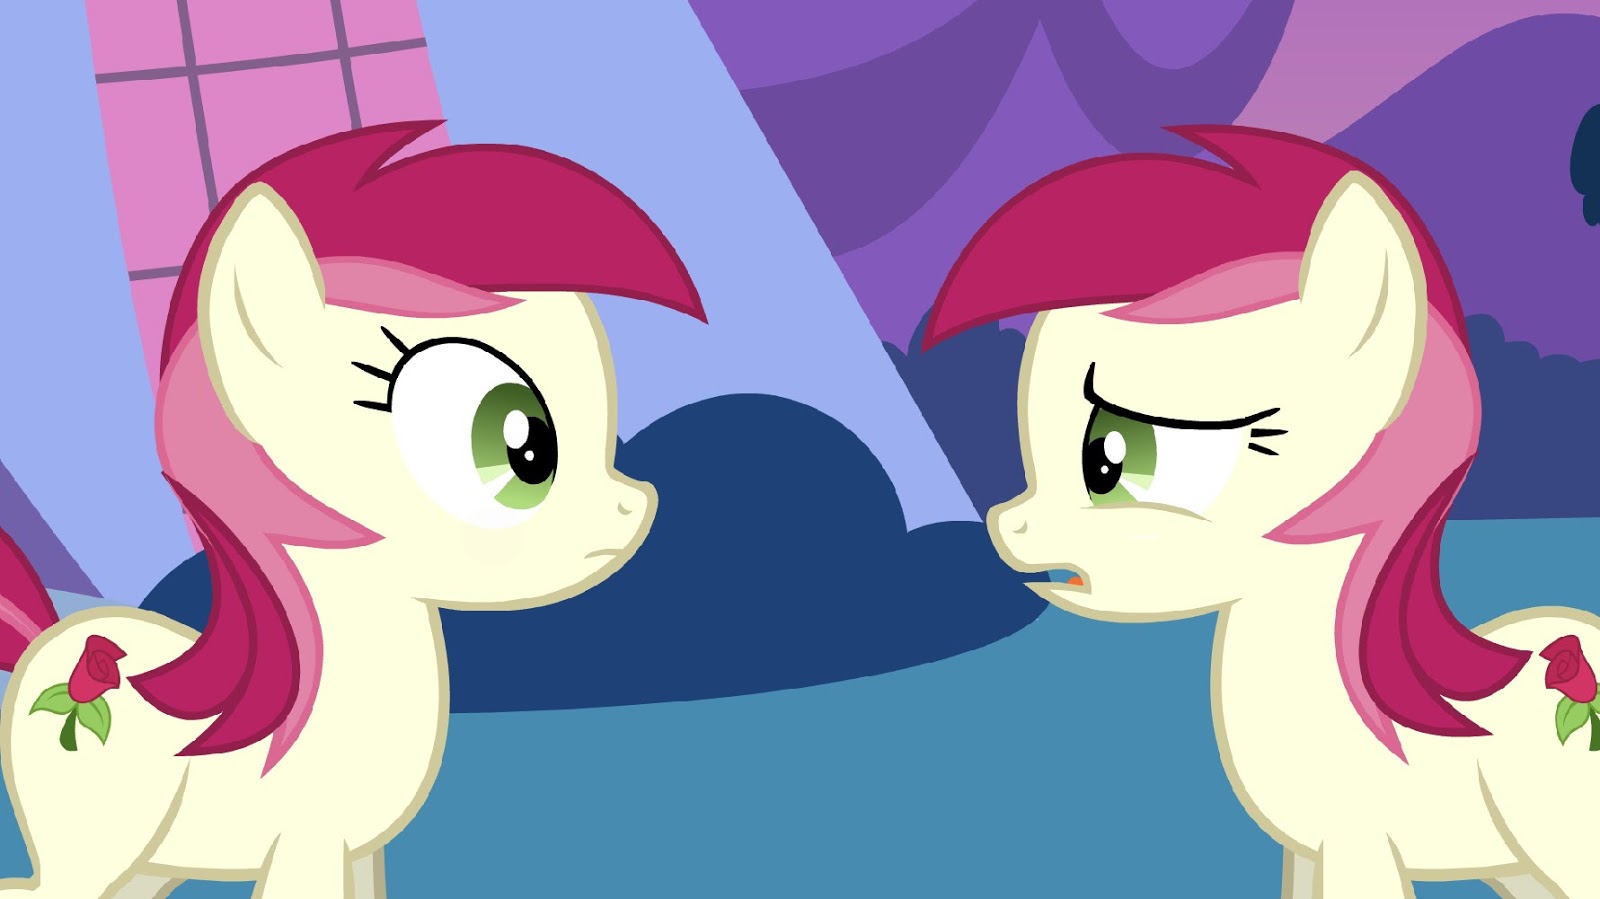 Equestria Daily - MLP Stuff!: Short Animation: Red Sus Amogus